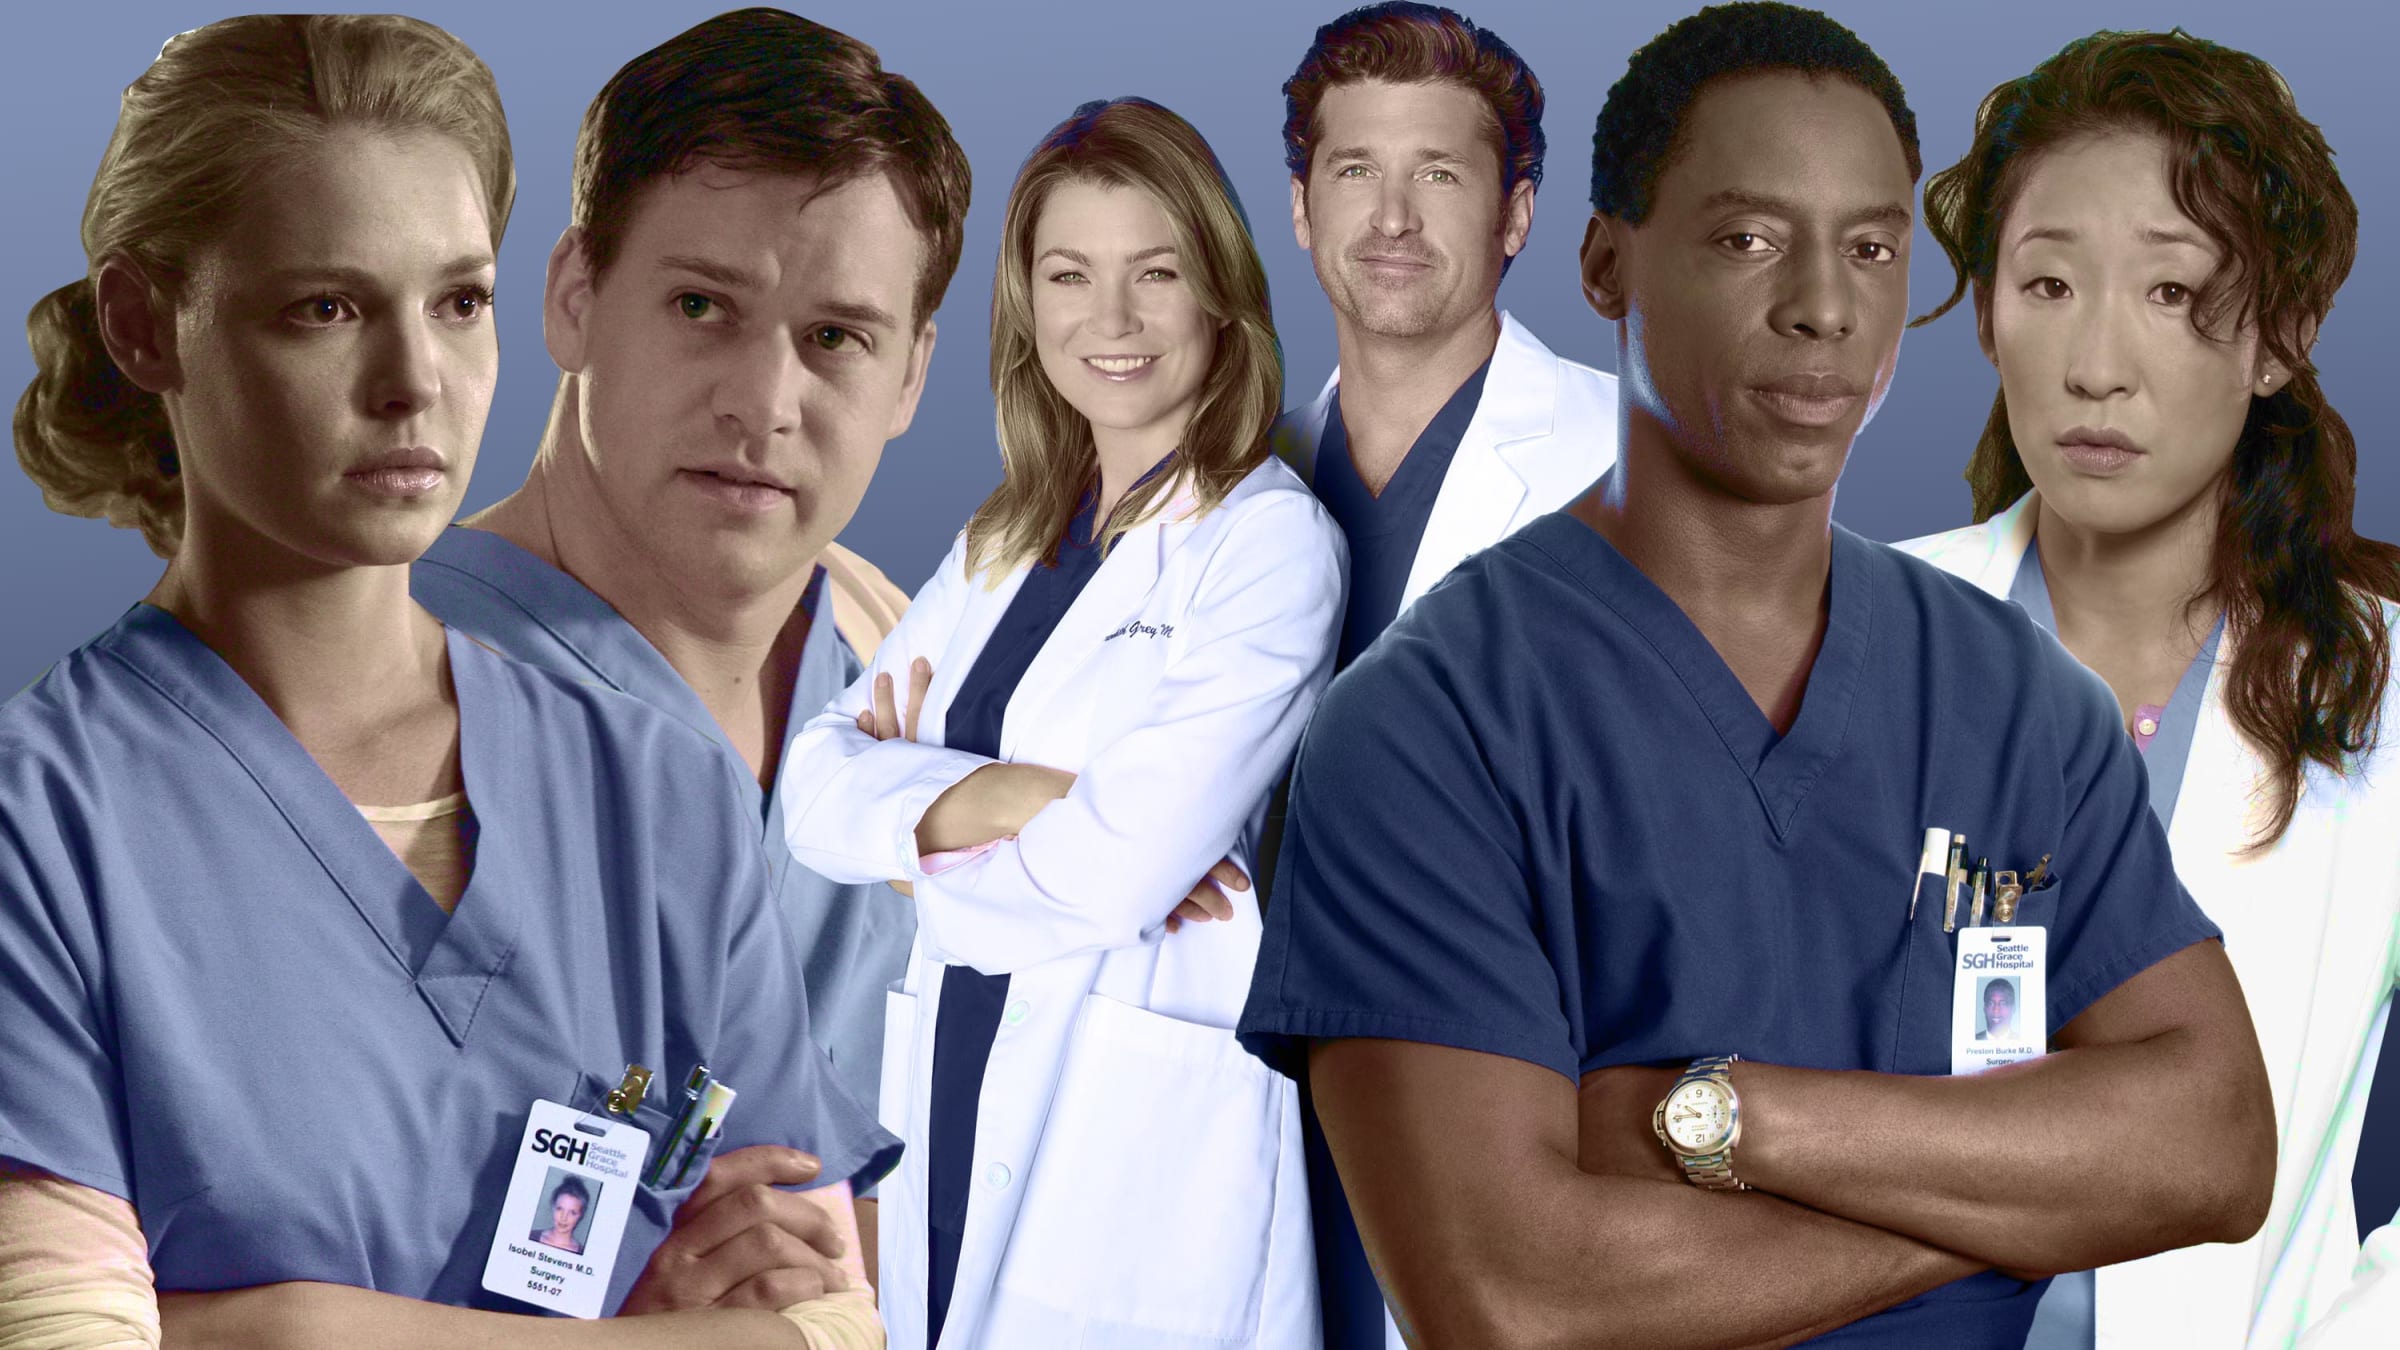 Inside 'Grey's Anatomy's' Many Behind-the-Scenes Scandals, From